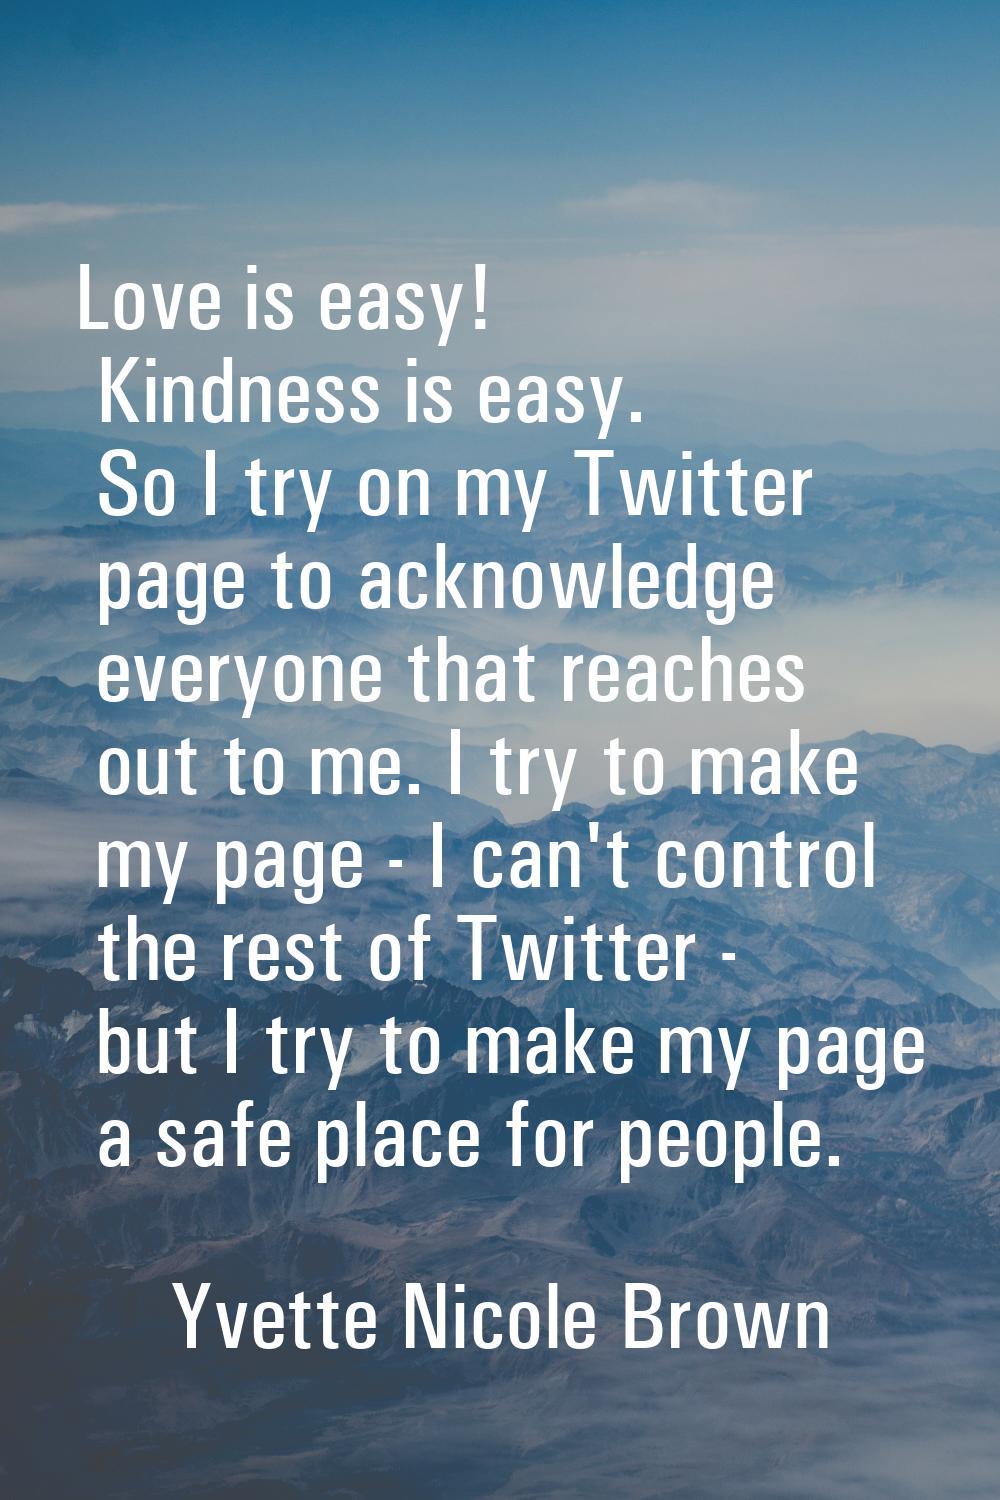 Love is easy! Kindness is easy. So I try on my Twitter page to acknowledge everyone that reaches ou